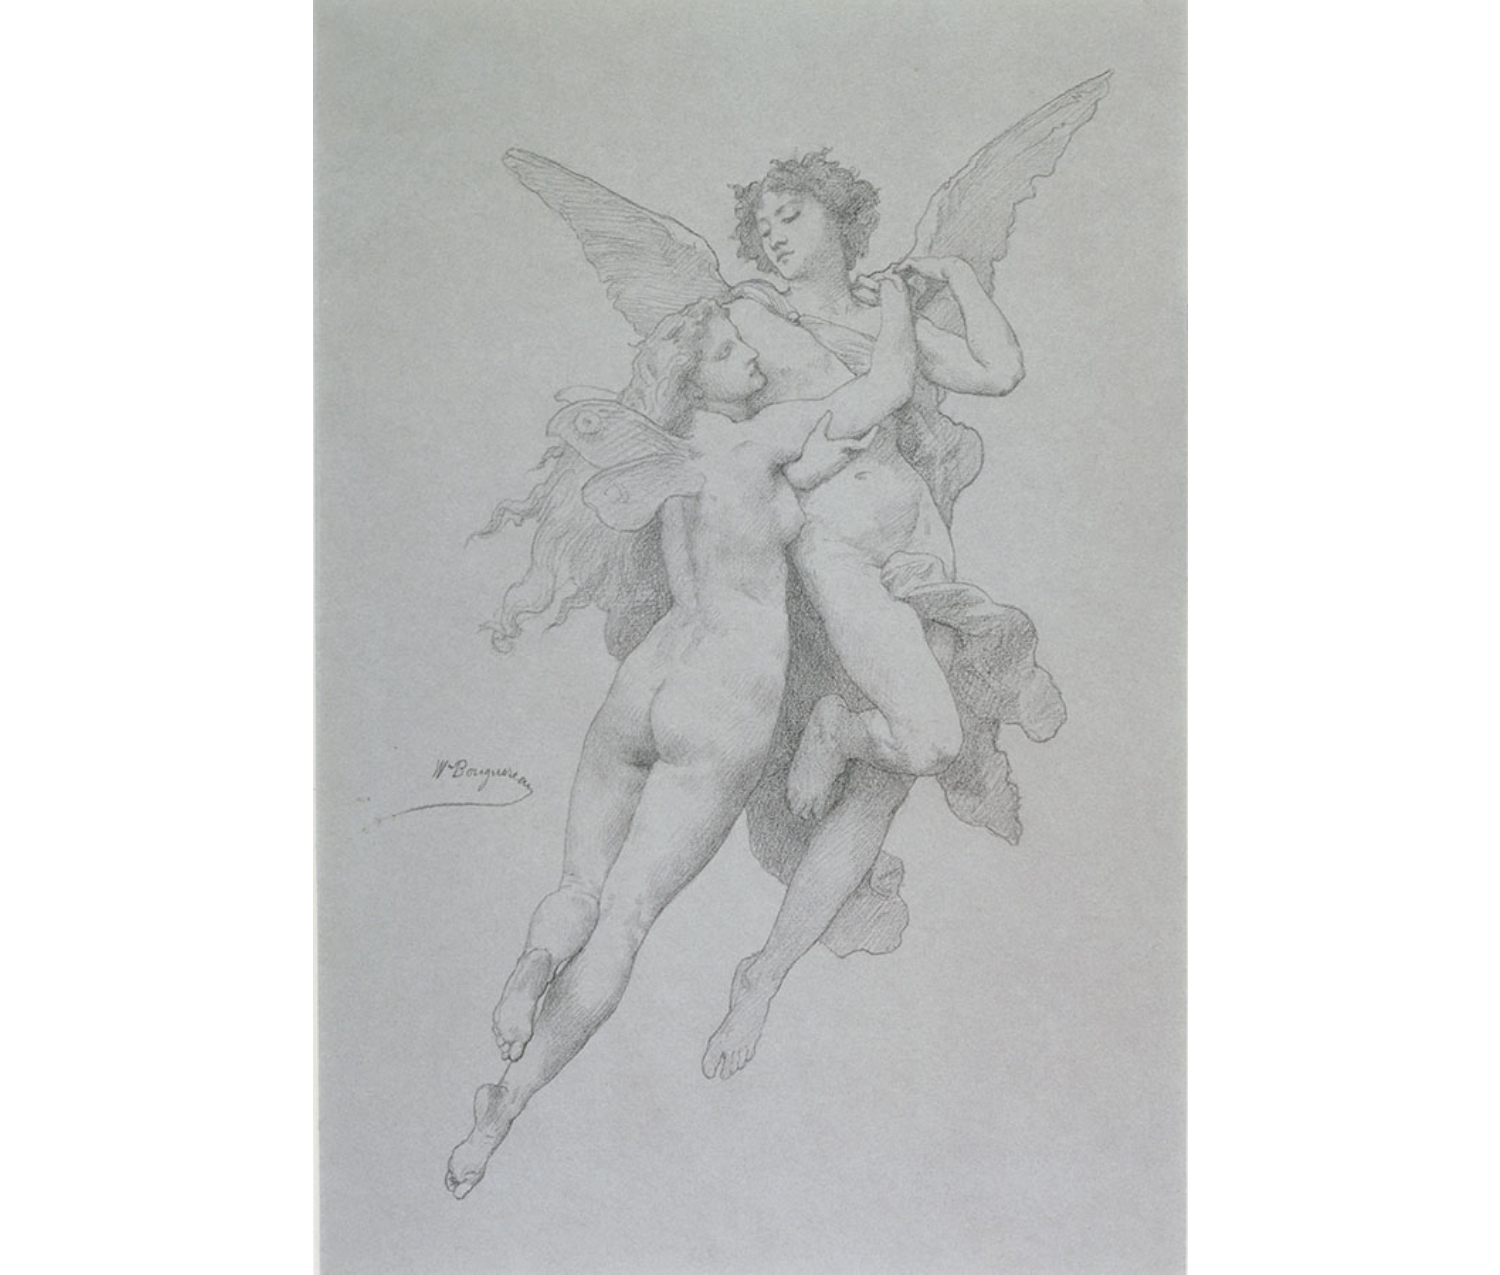 Winged, nude woman clinging to a winged, nude boy; both flying upward.